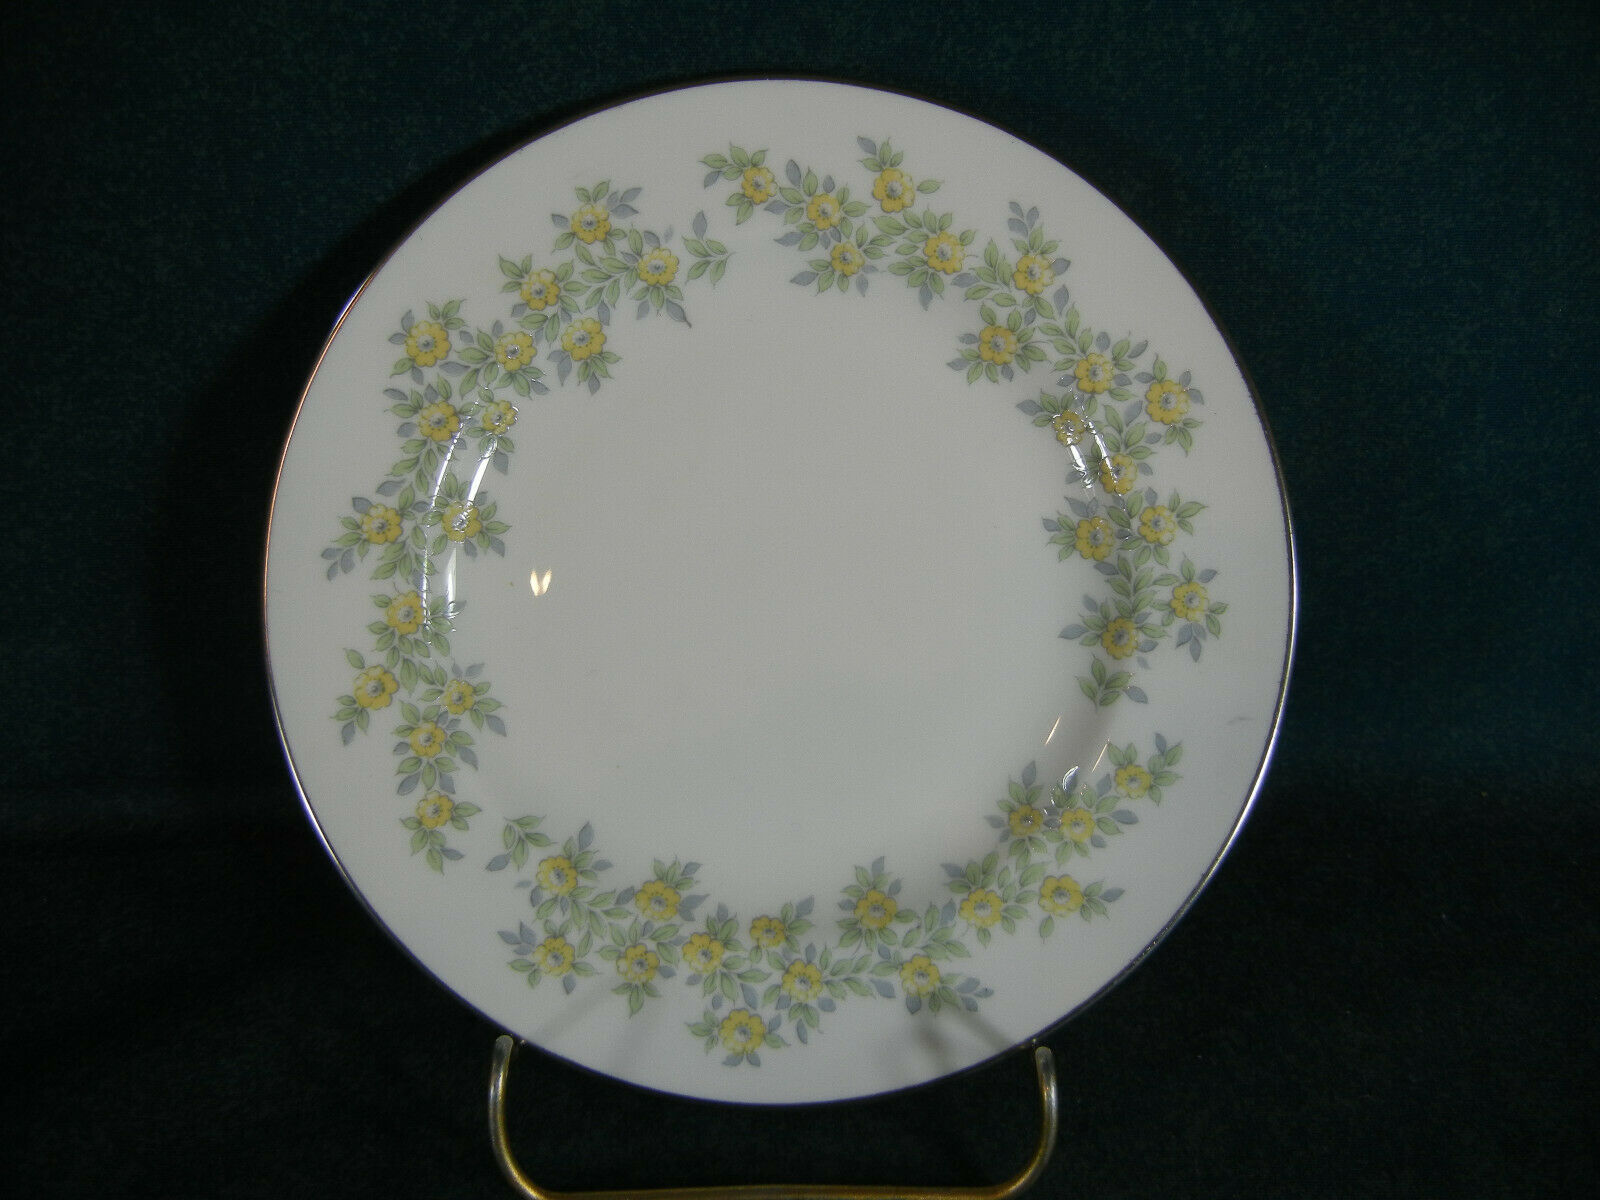 Spode Melanie Bread and Butter Plate(s)